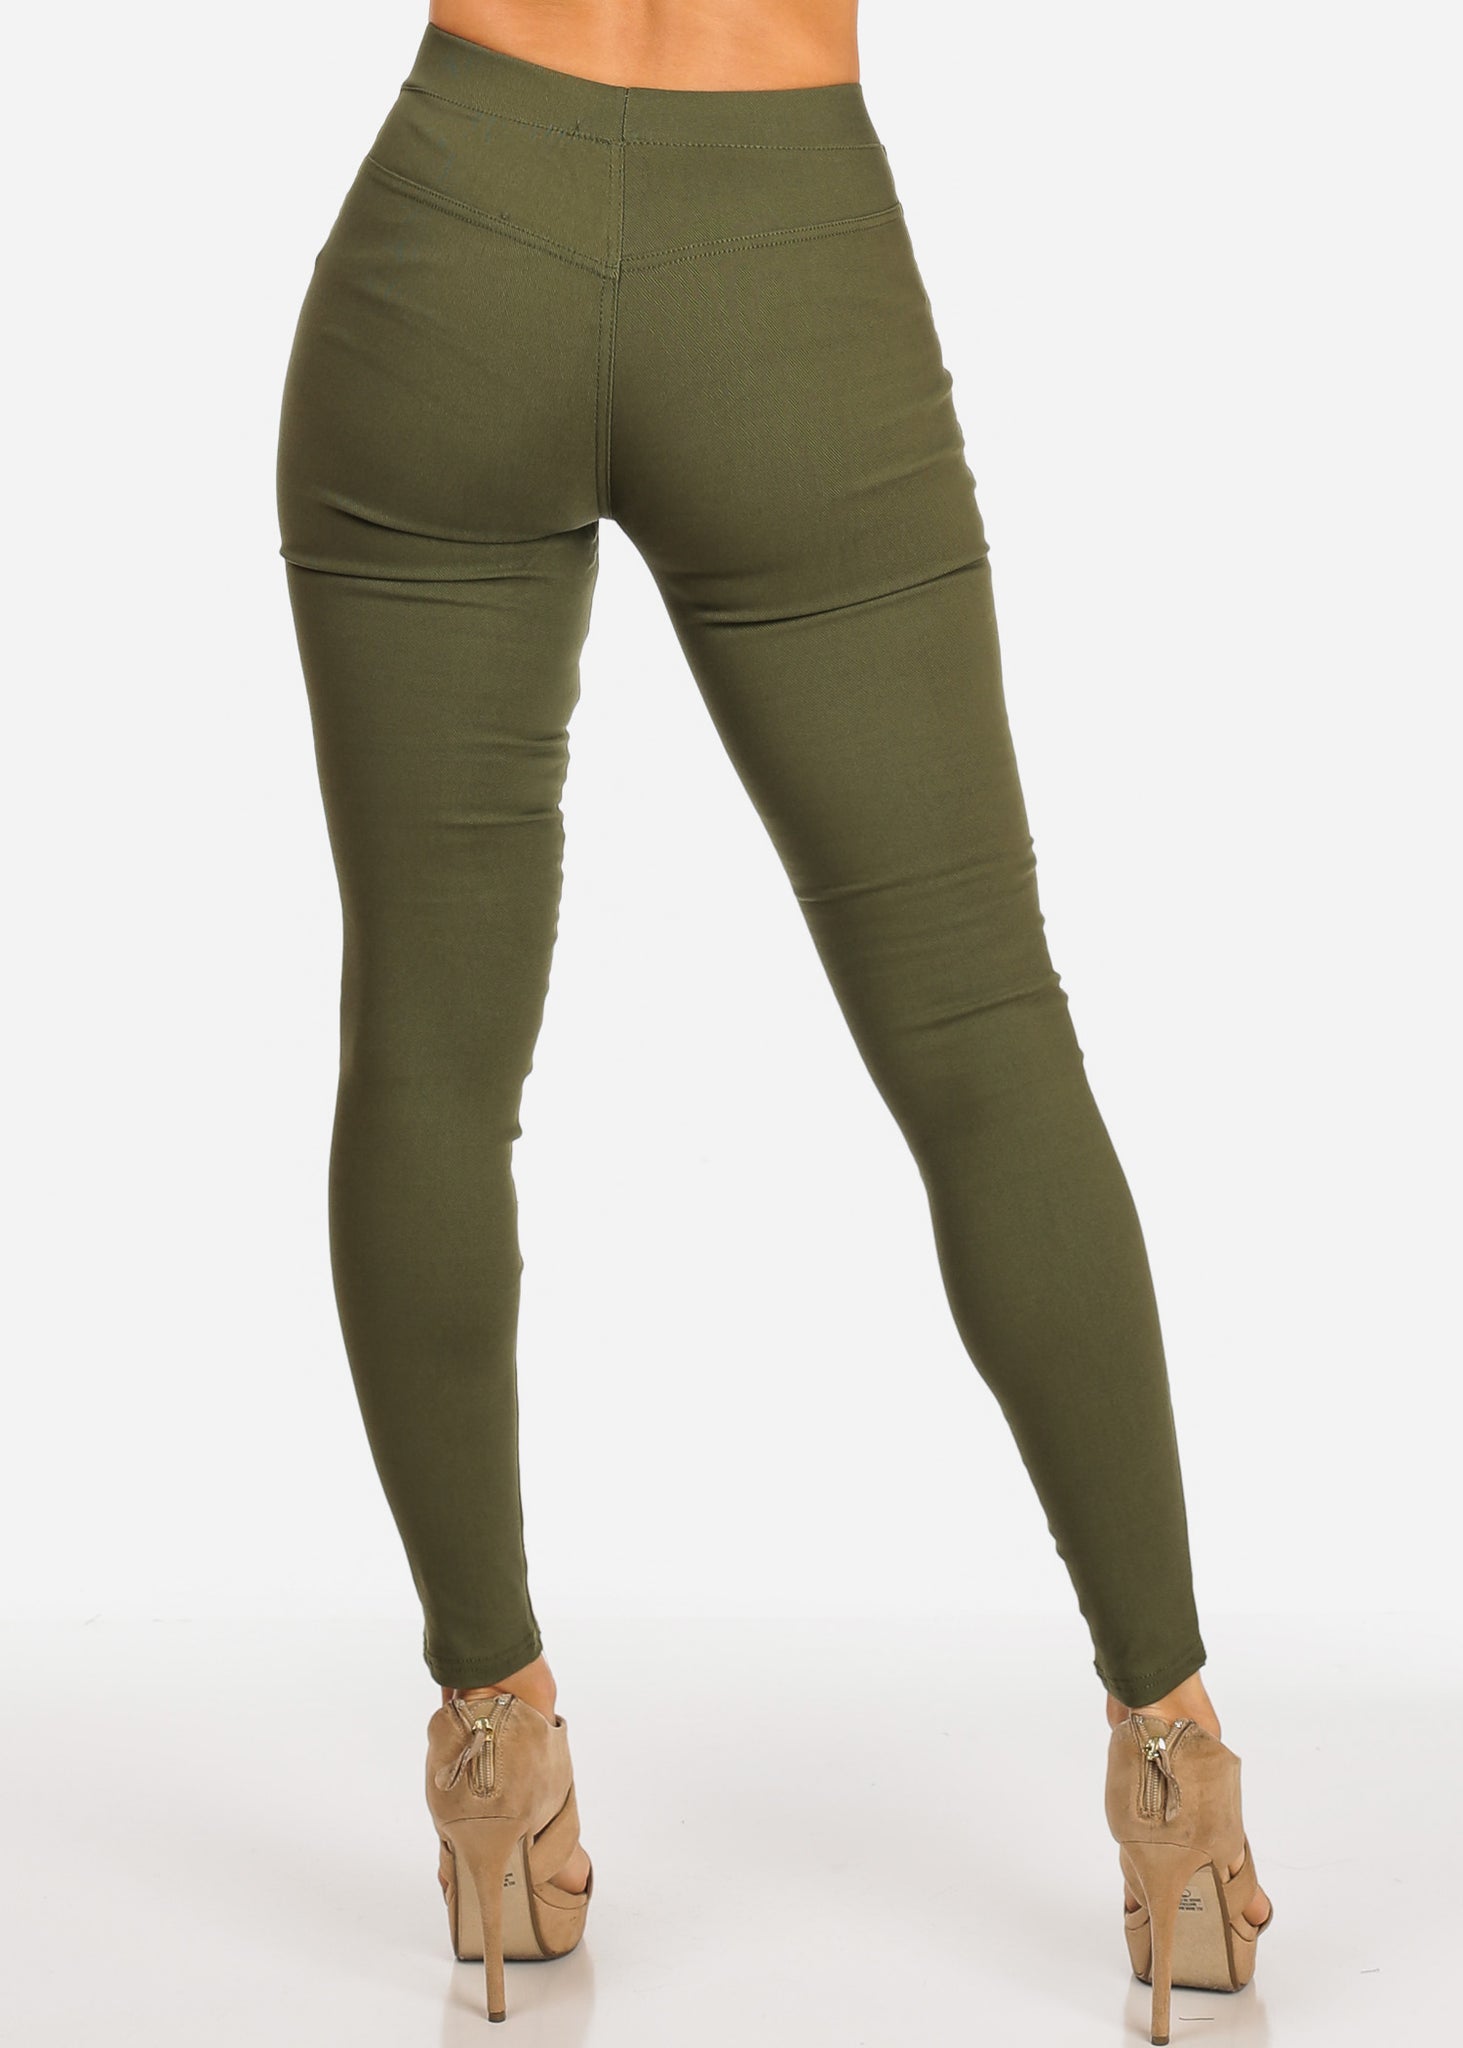 High Rise Women,s Olive Color Moto Knee Detail Leggings MTO-3 – One Size  Fits